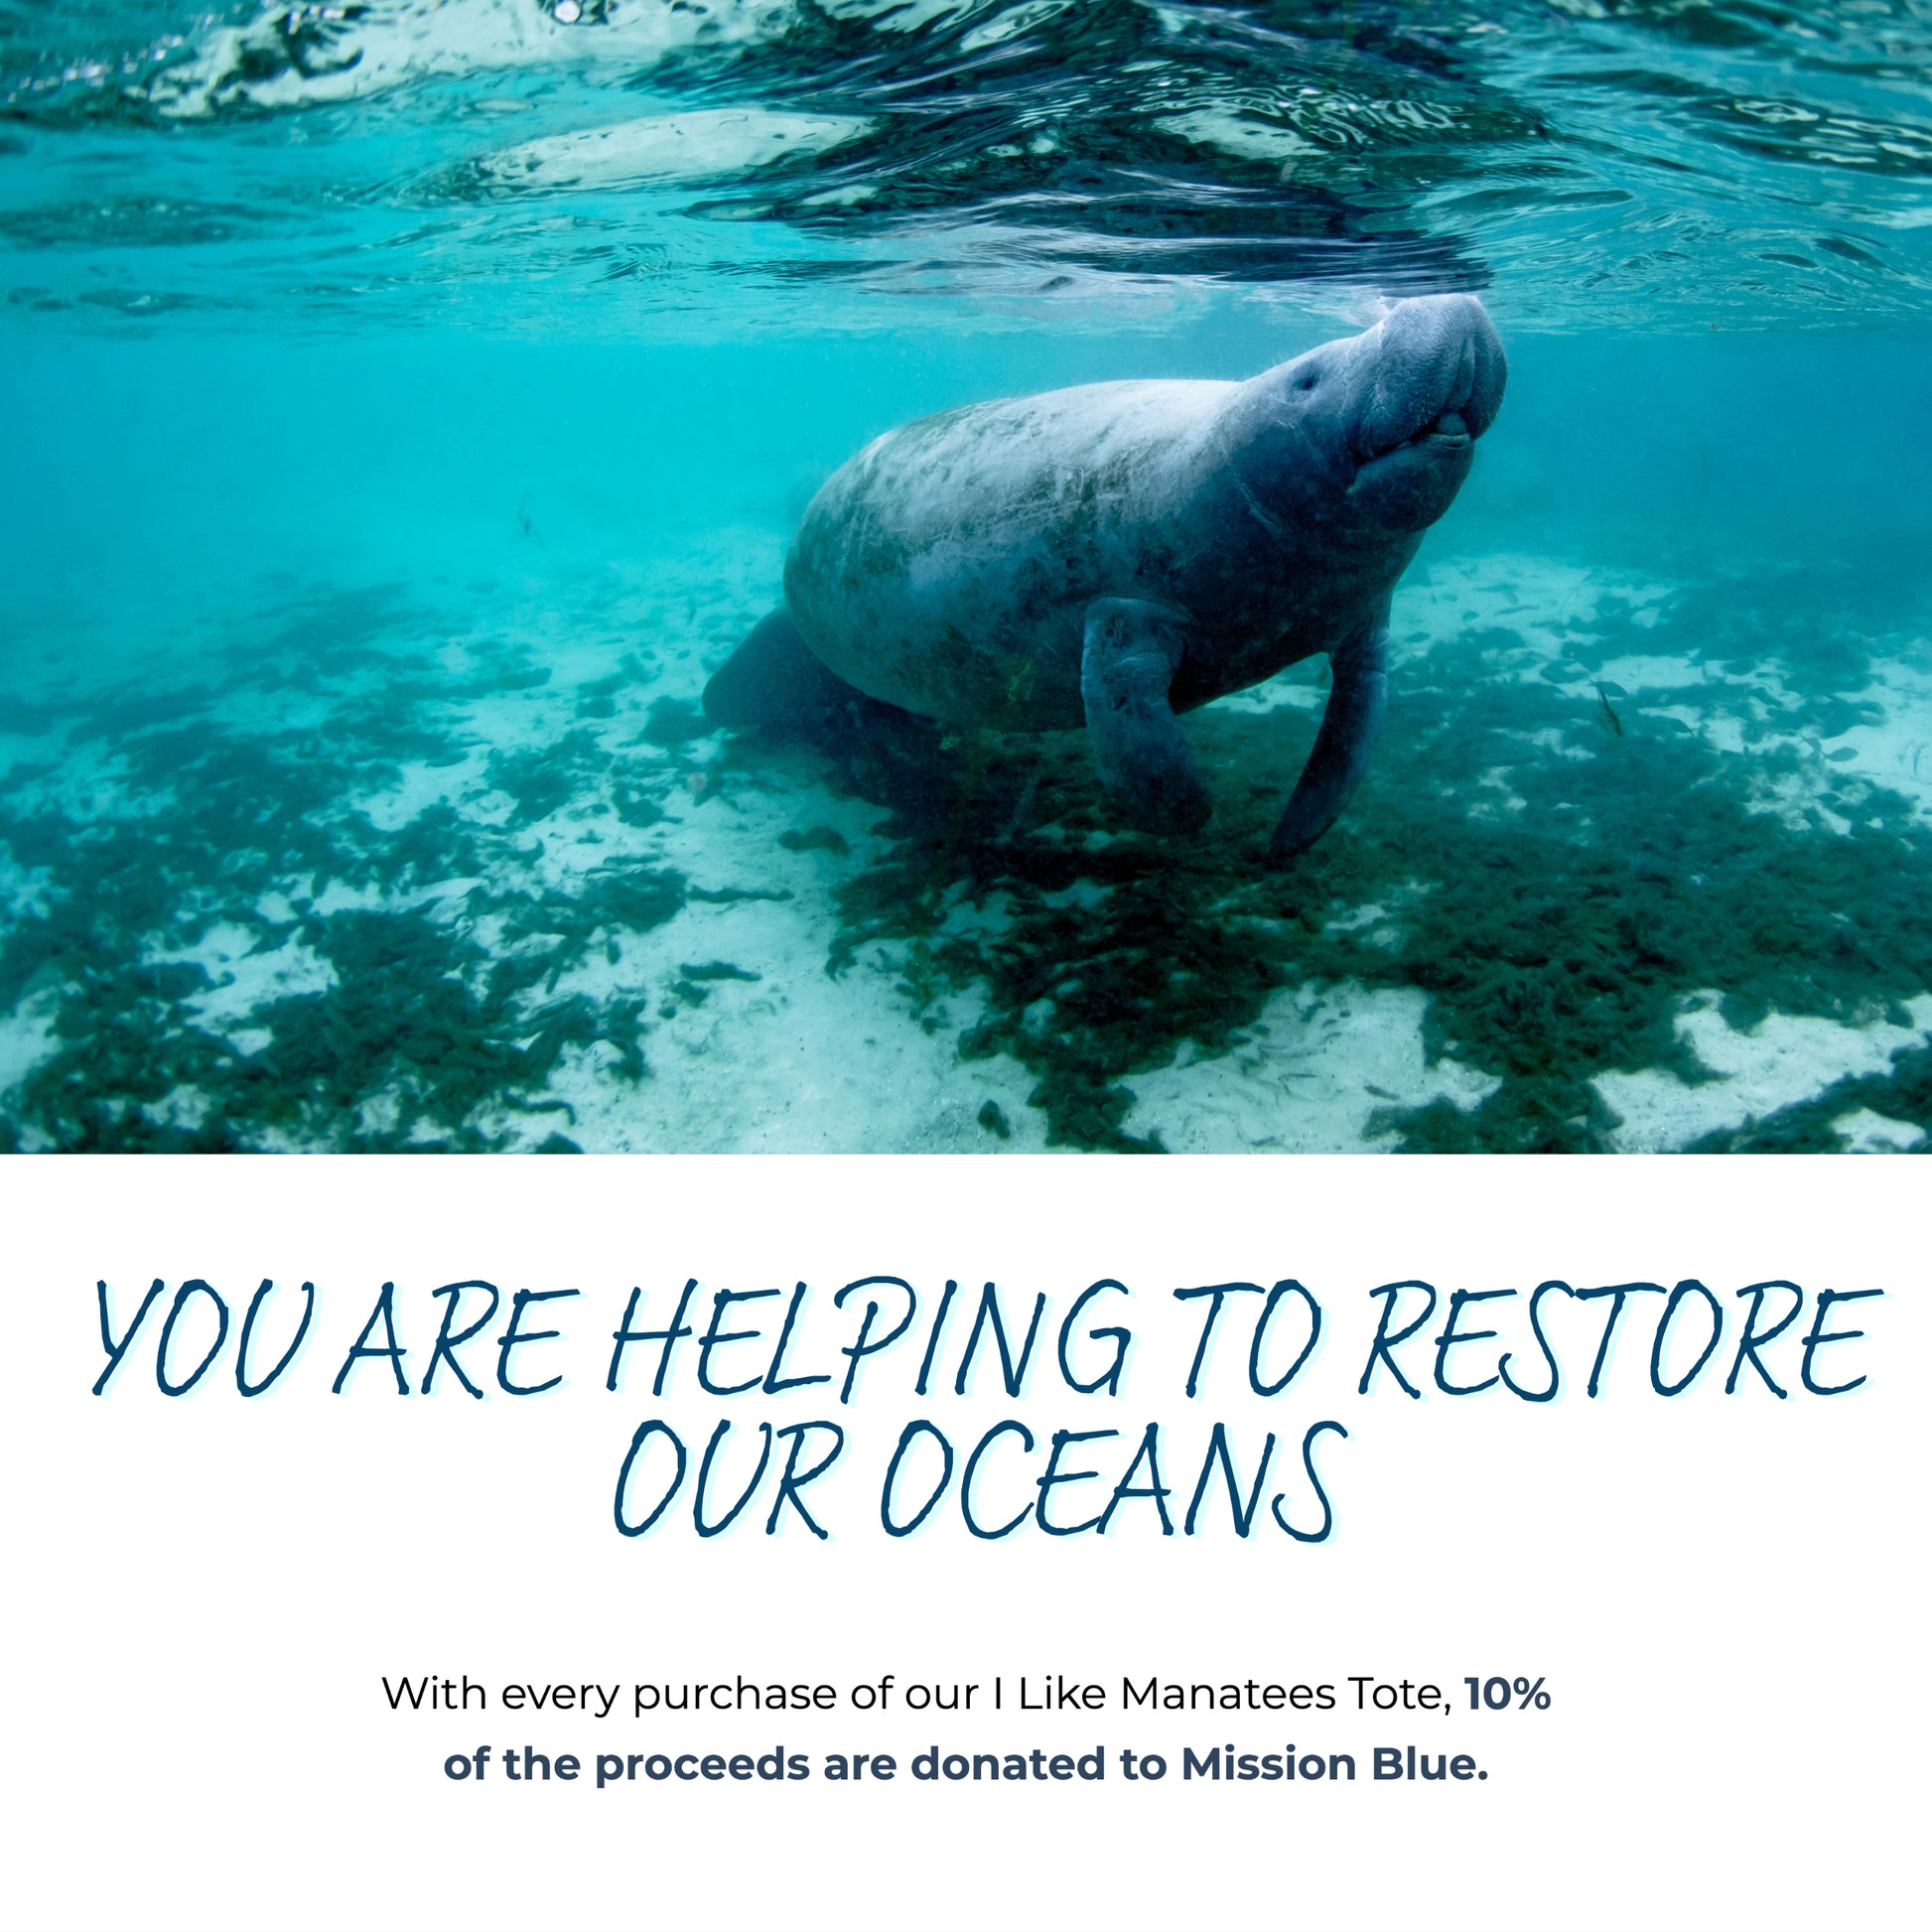 I Like Manatees Tote Bag - Connected Clothing Company - 10% of proceeds donated to ocean conservation